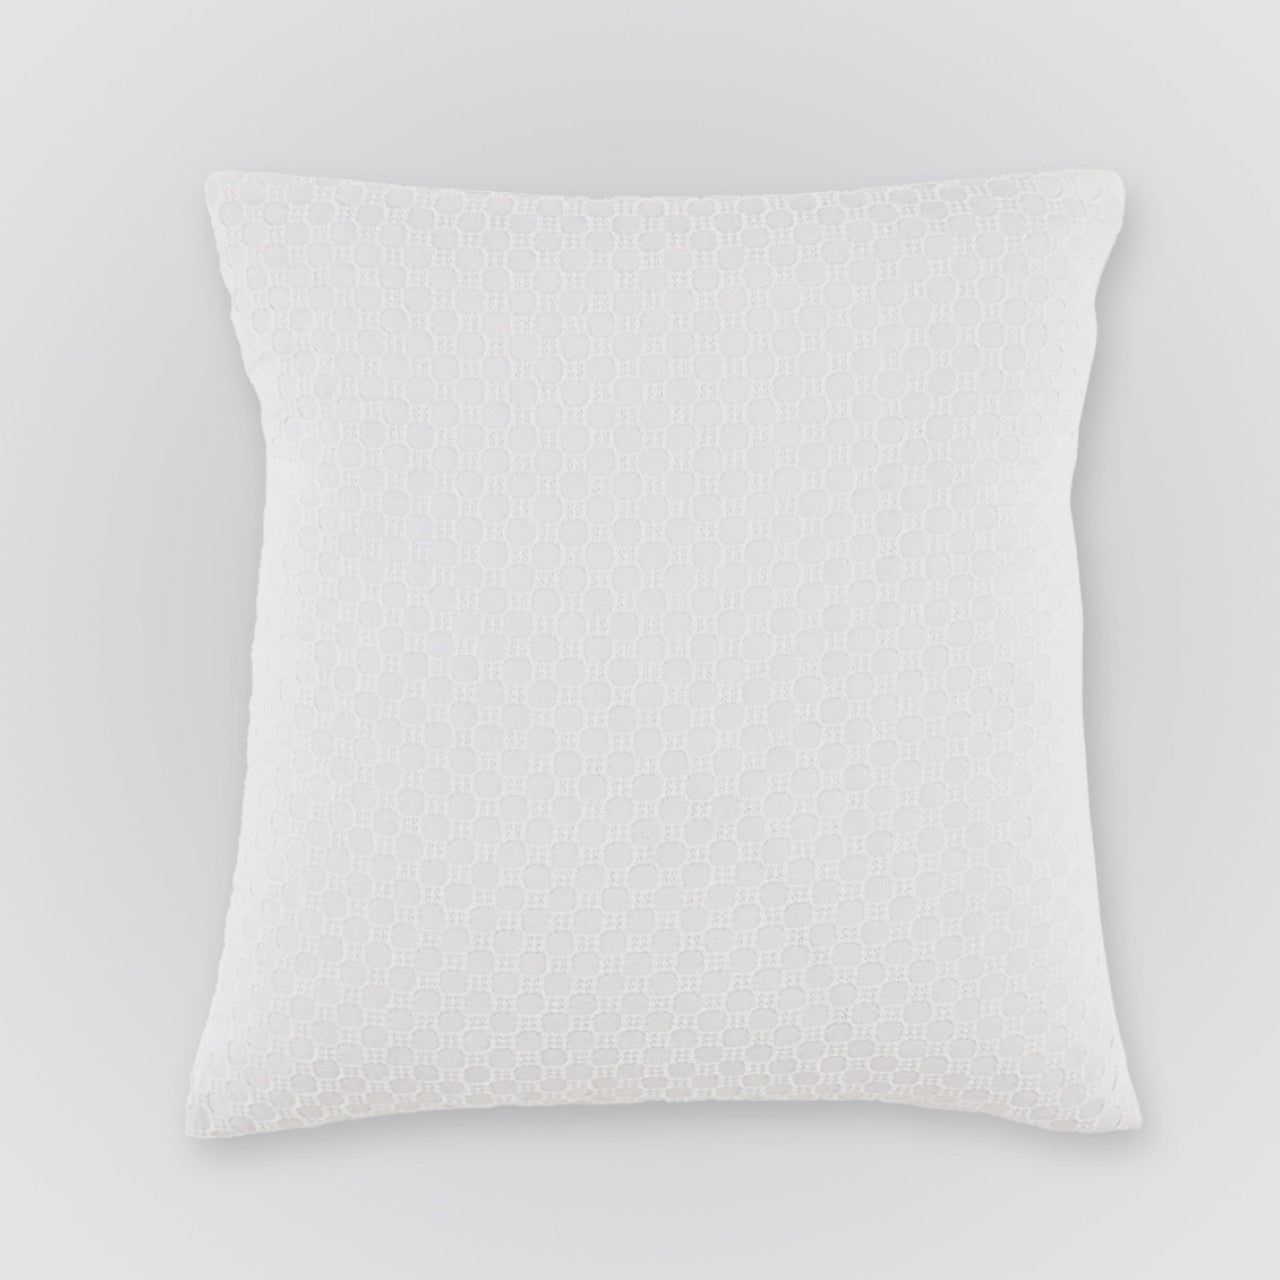 Noosa Cushion Cover on a white background